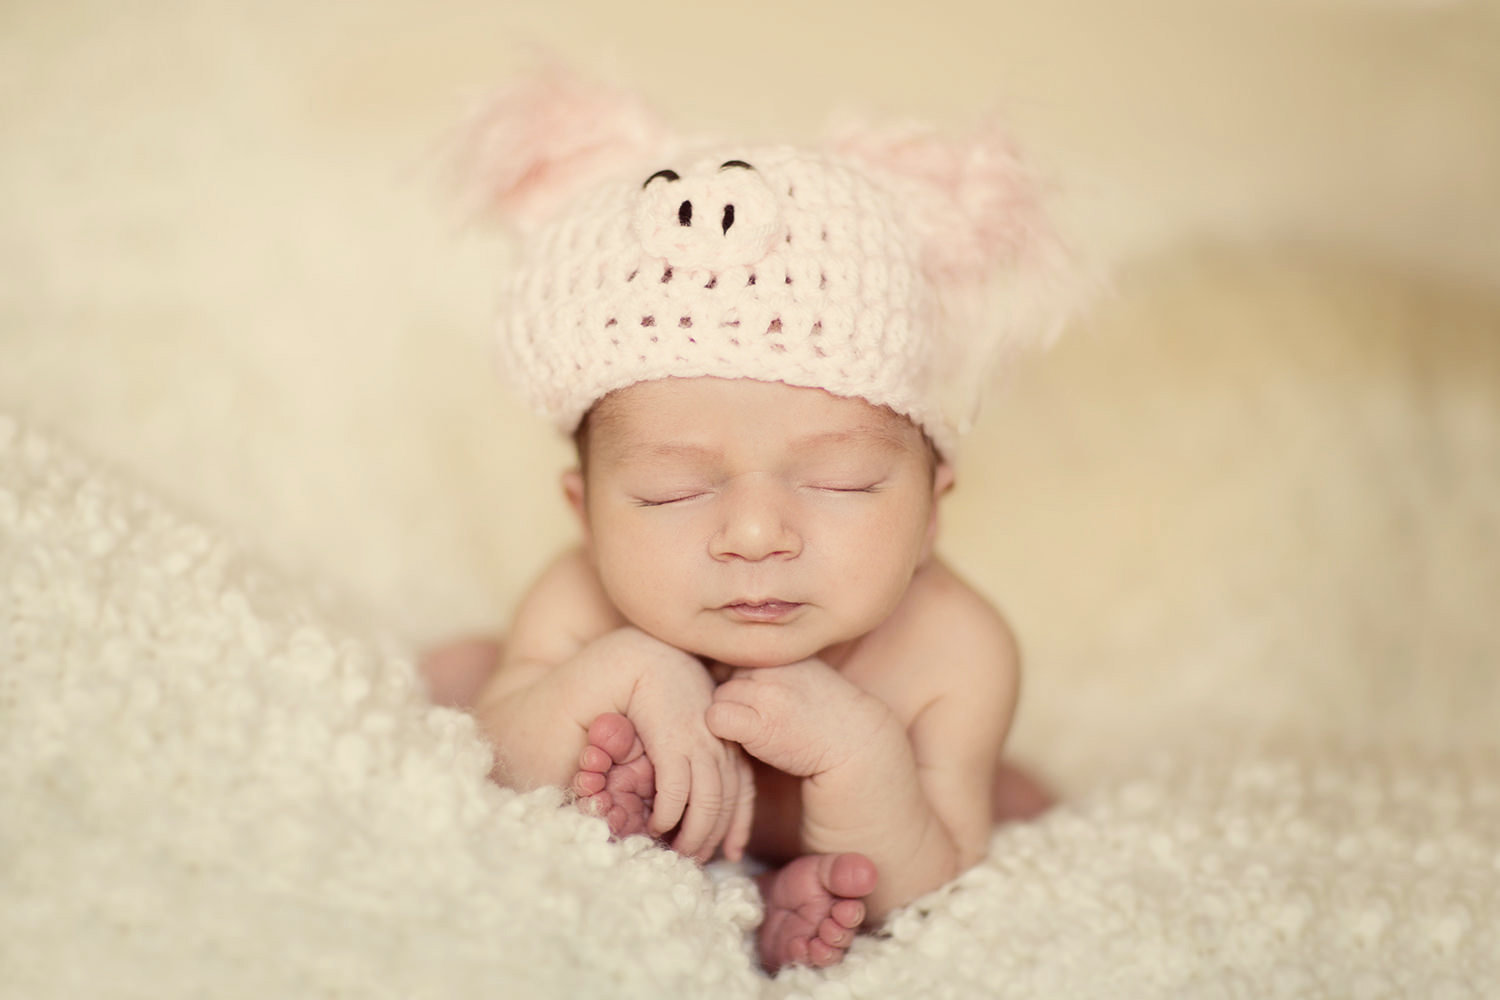 san diego newborn photographer | newborn with cute pink hat with feathers